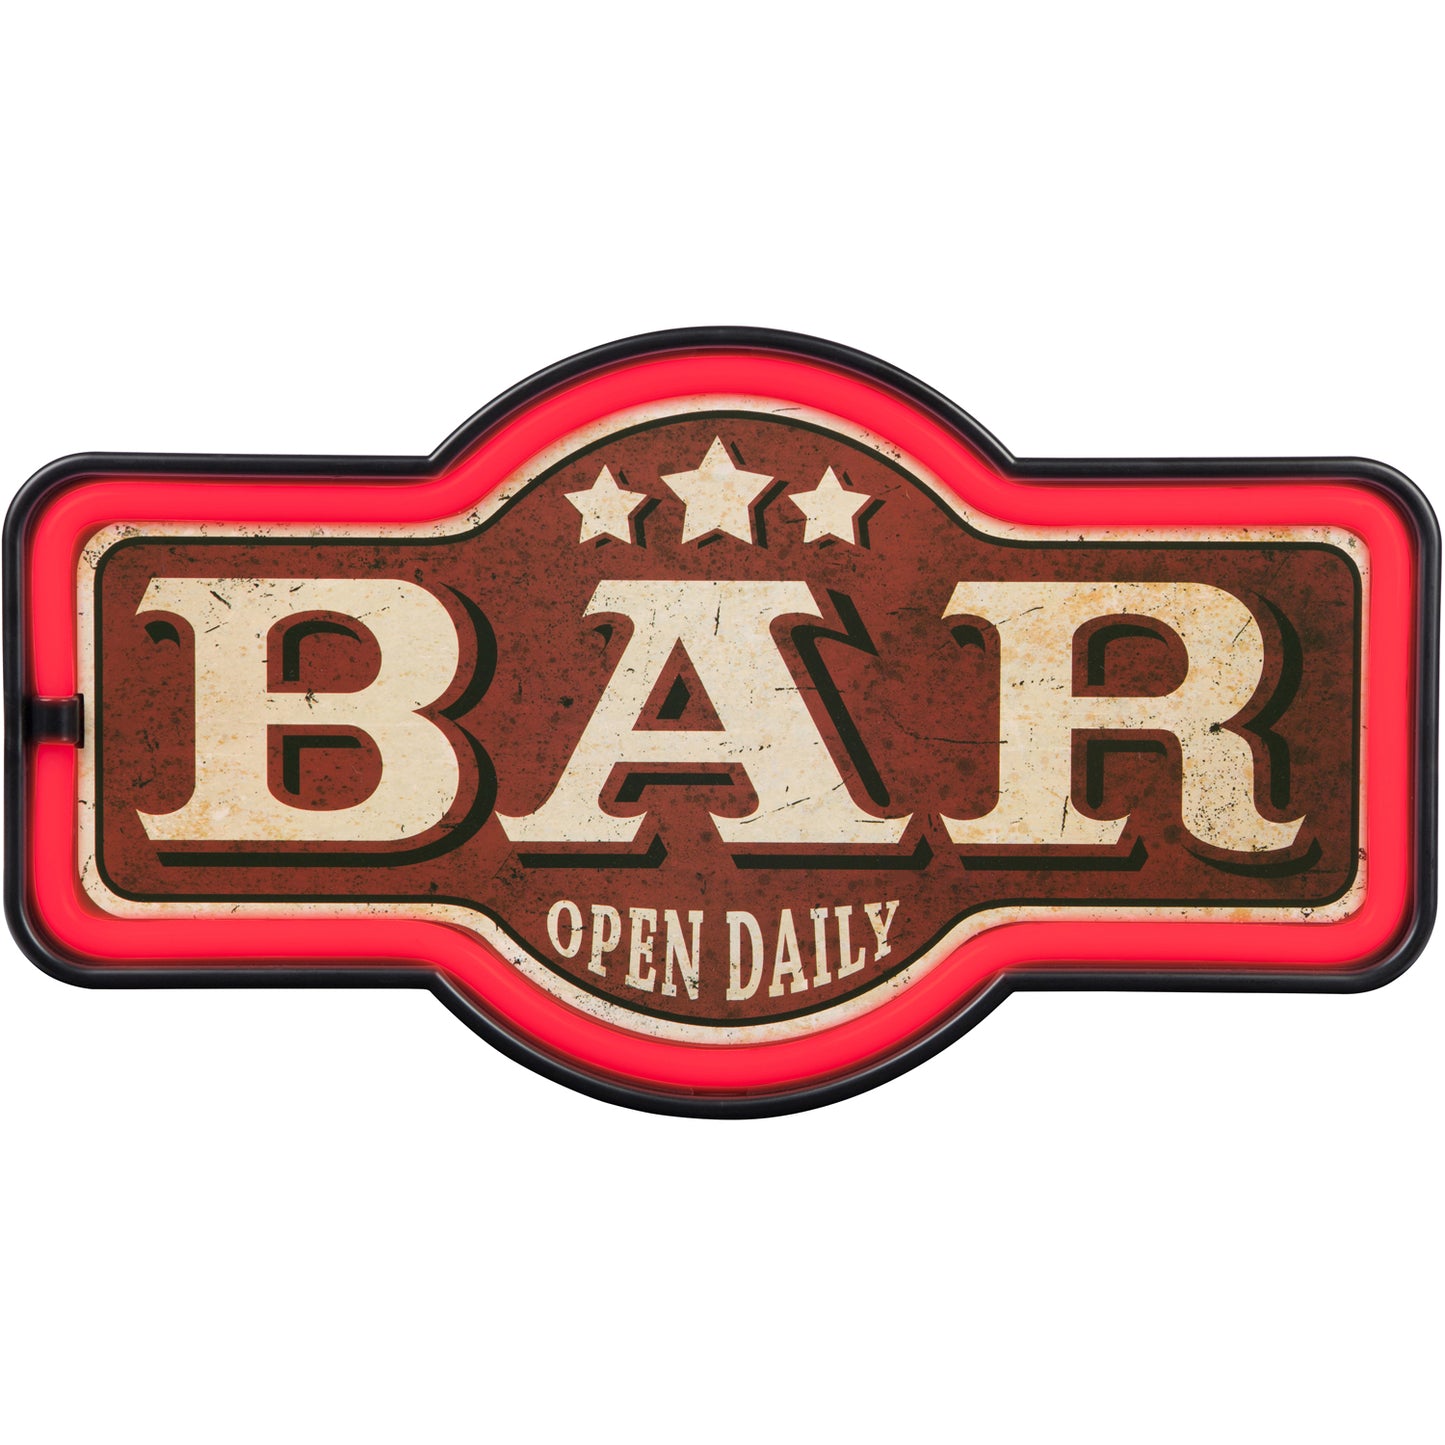 Bar Open Daily LED Neon Sign